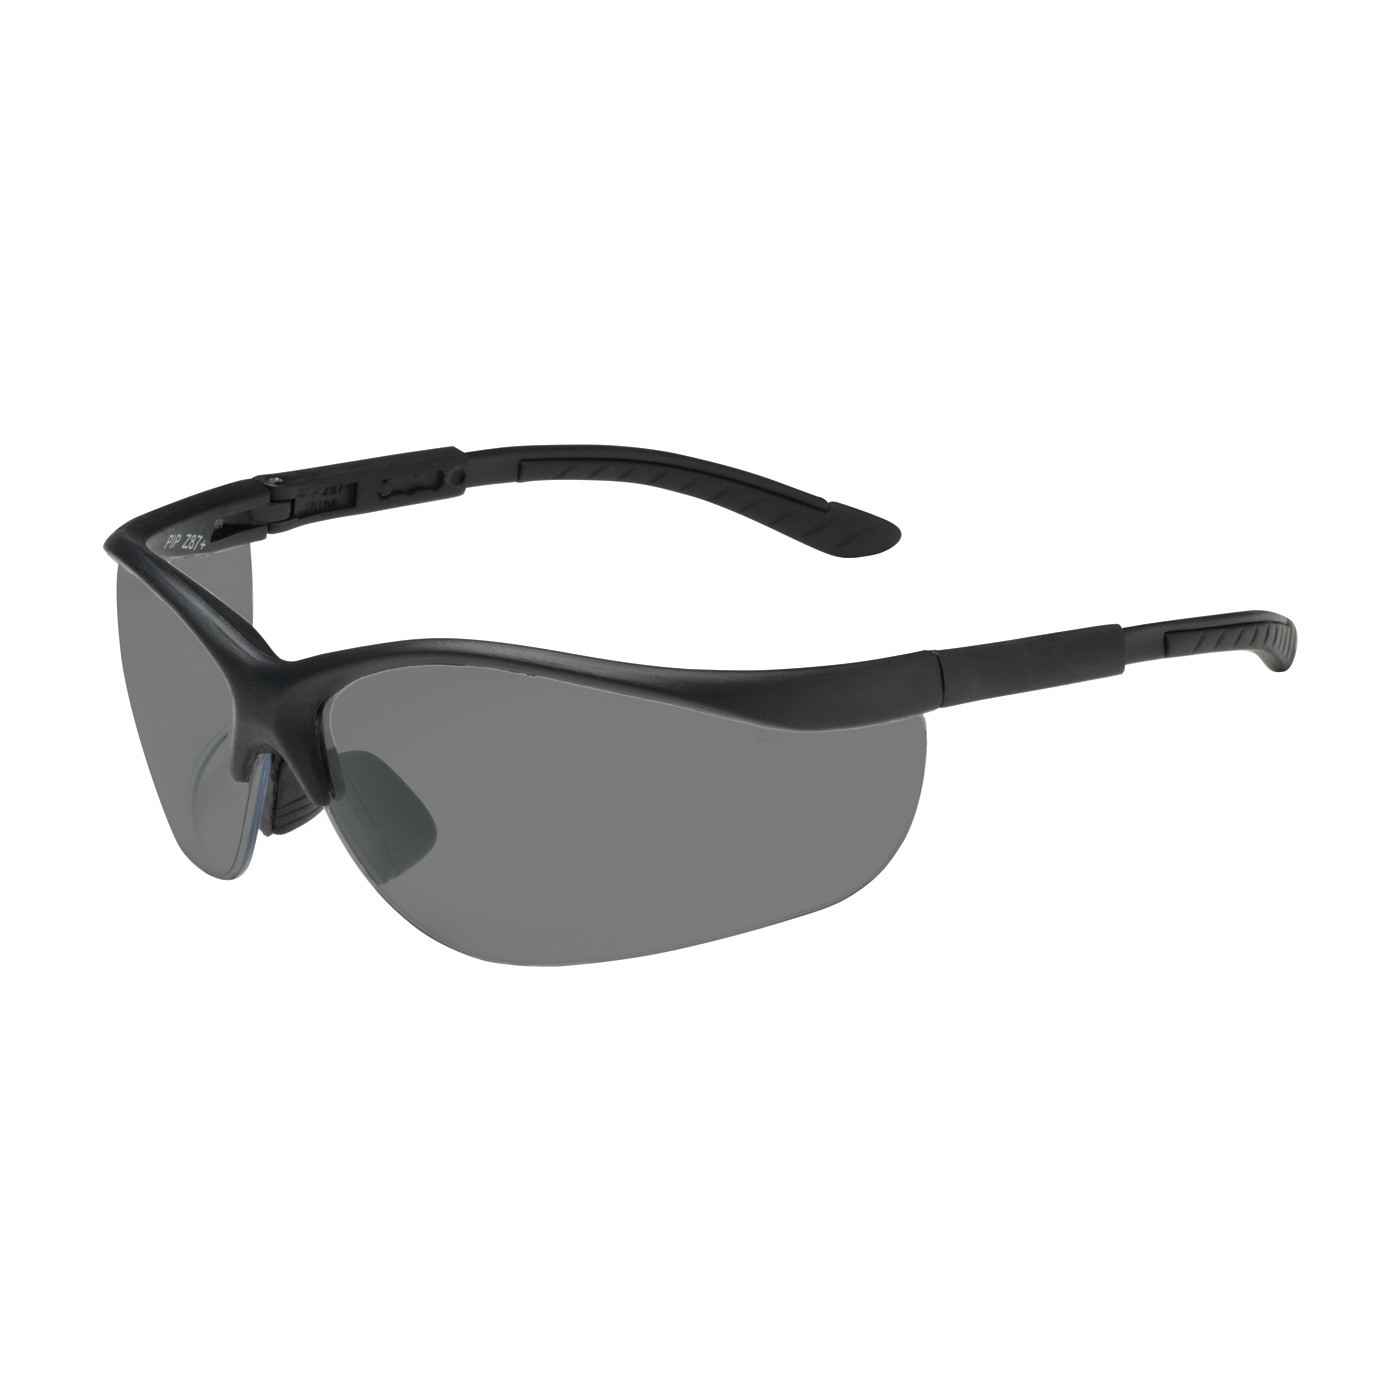 Hi-Voltage AC™ Semi-Rimless Safety Glasses with Black Frame, Gray Lens and Anti-Scratch Coating  (#250-21-0401)